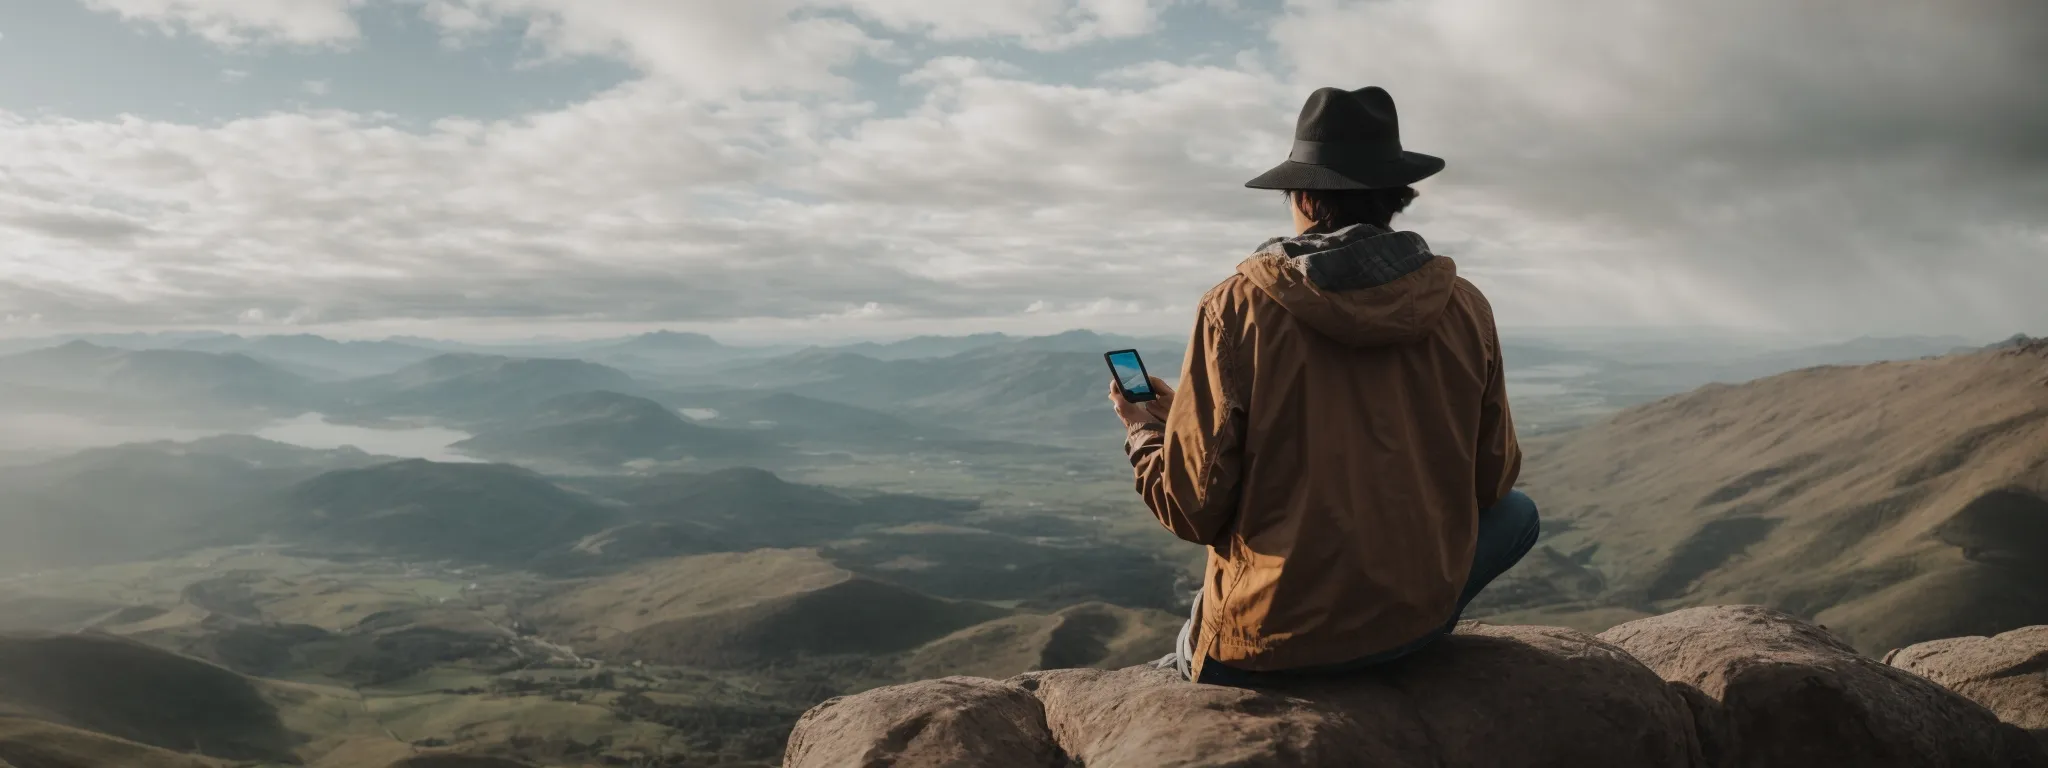 a traveler immersed in awe at a panoramic vista while swiping through a travel app on their smartphone.